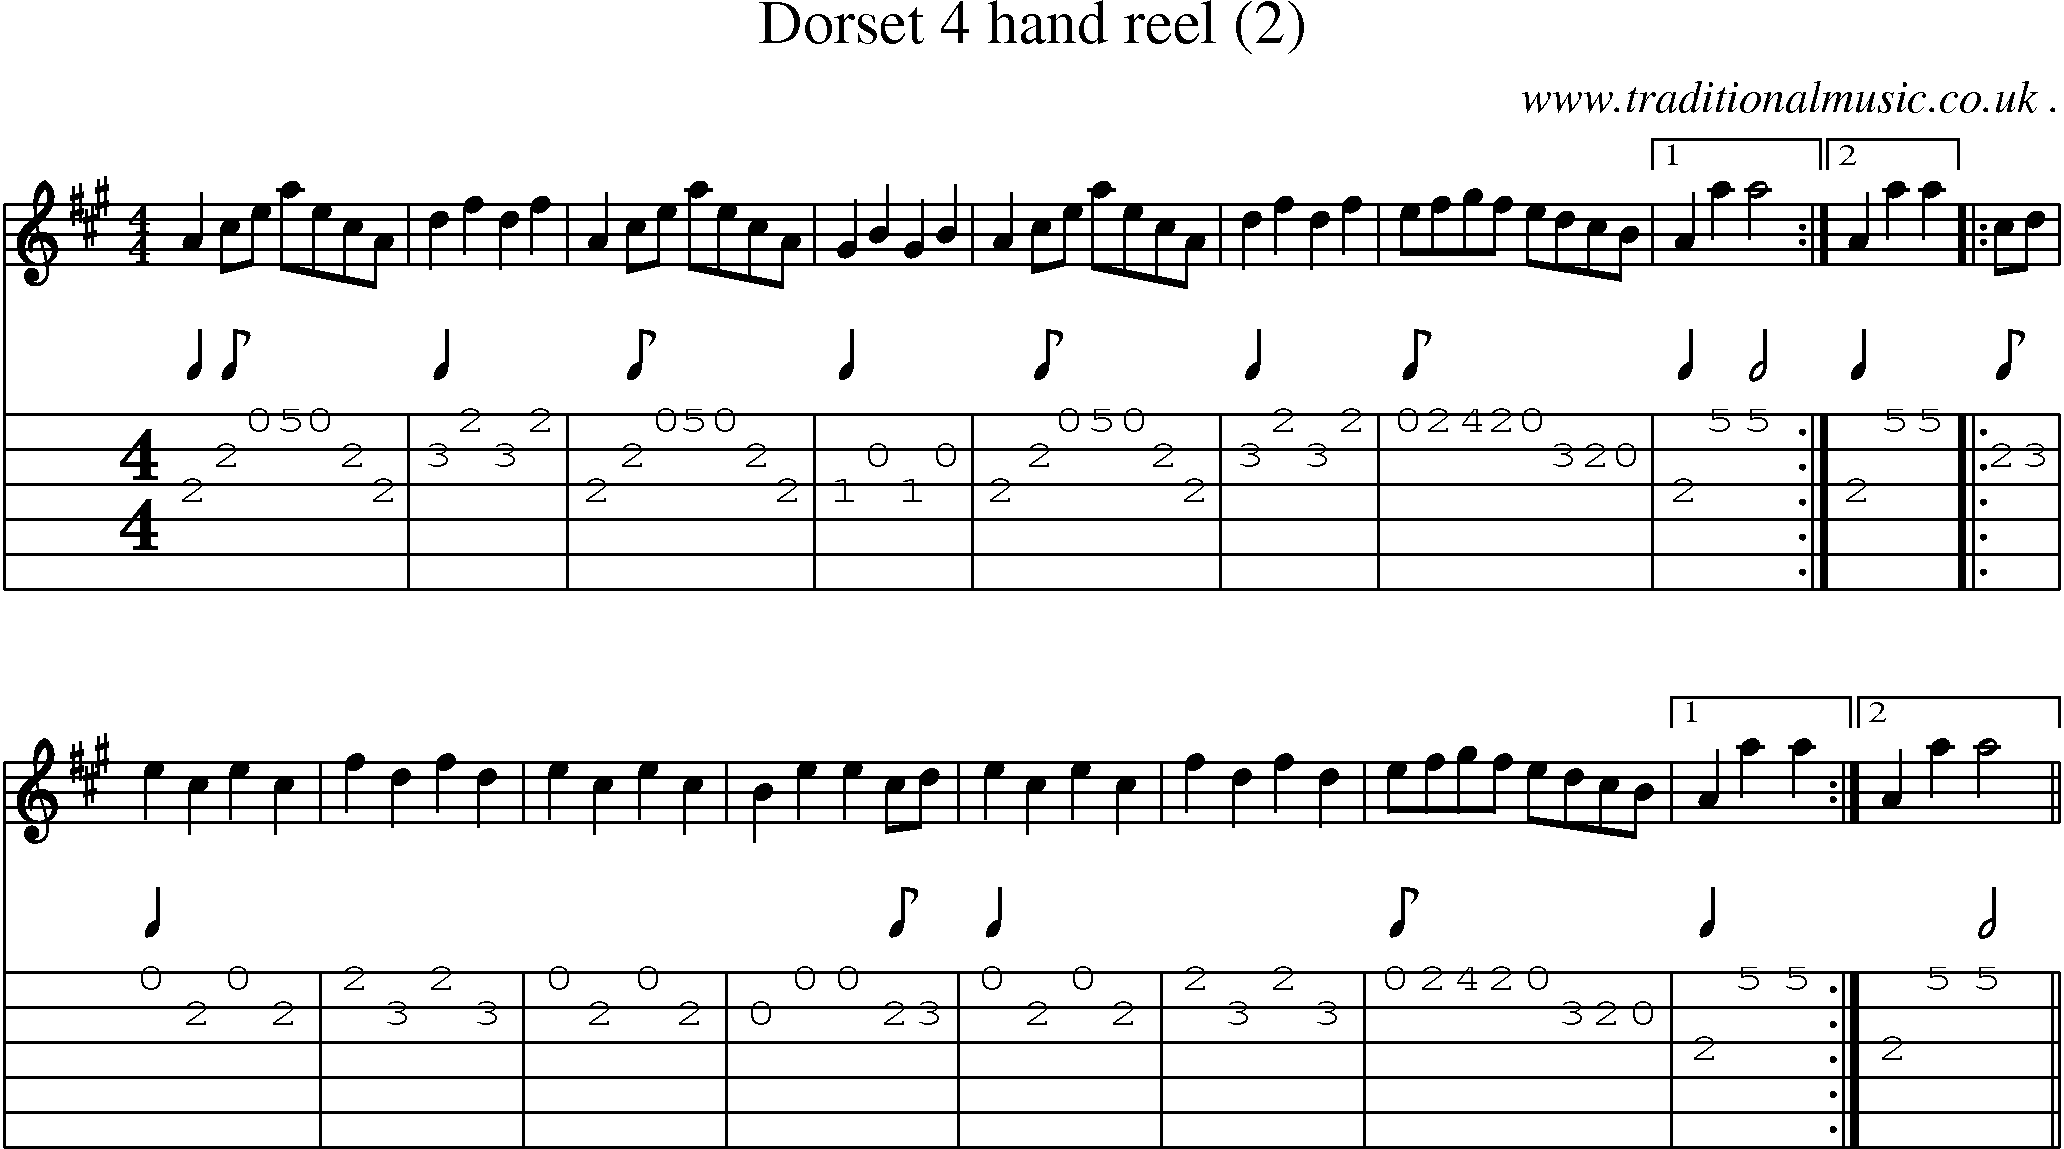 Sheet-Music and Guitar Tabs for Dorset 4 Hand Reel (2)